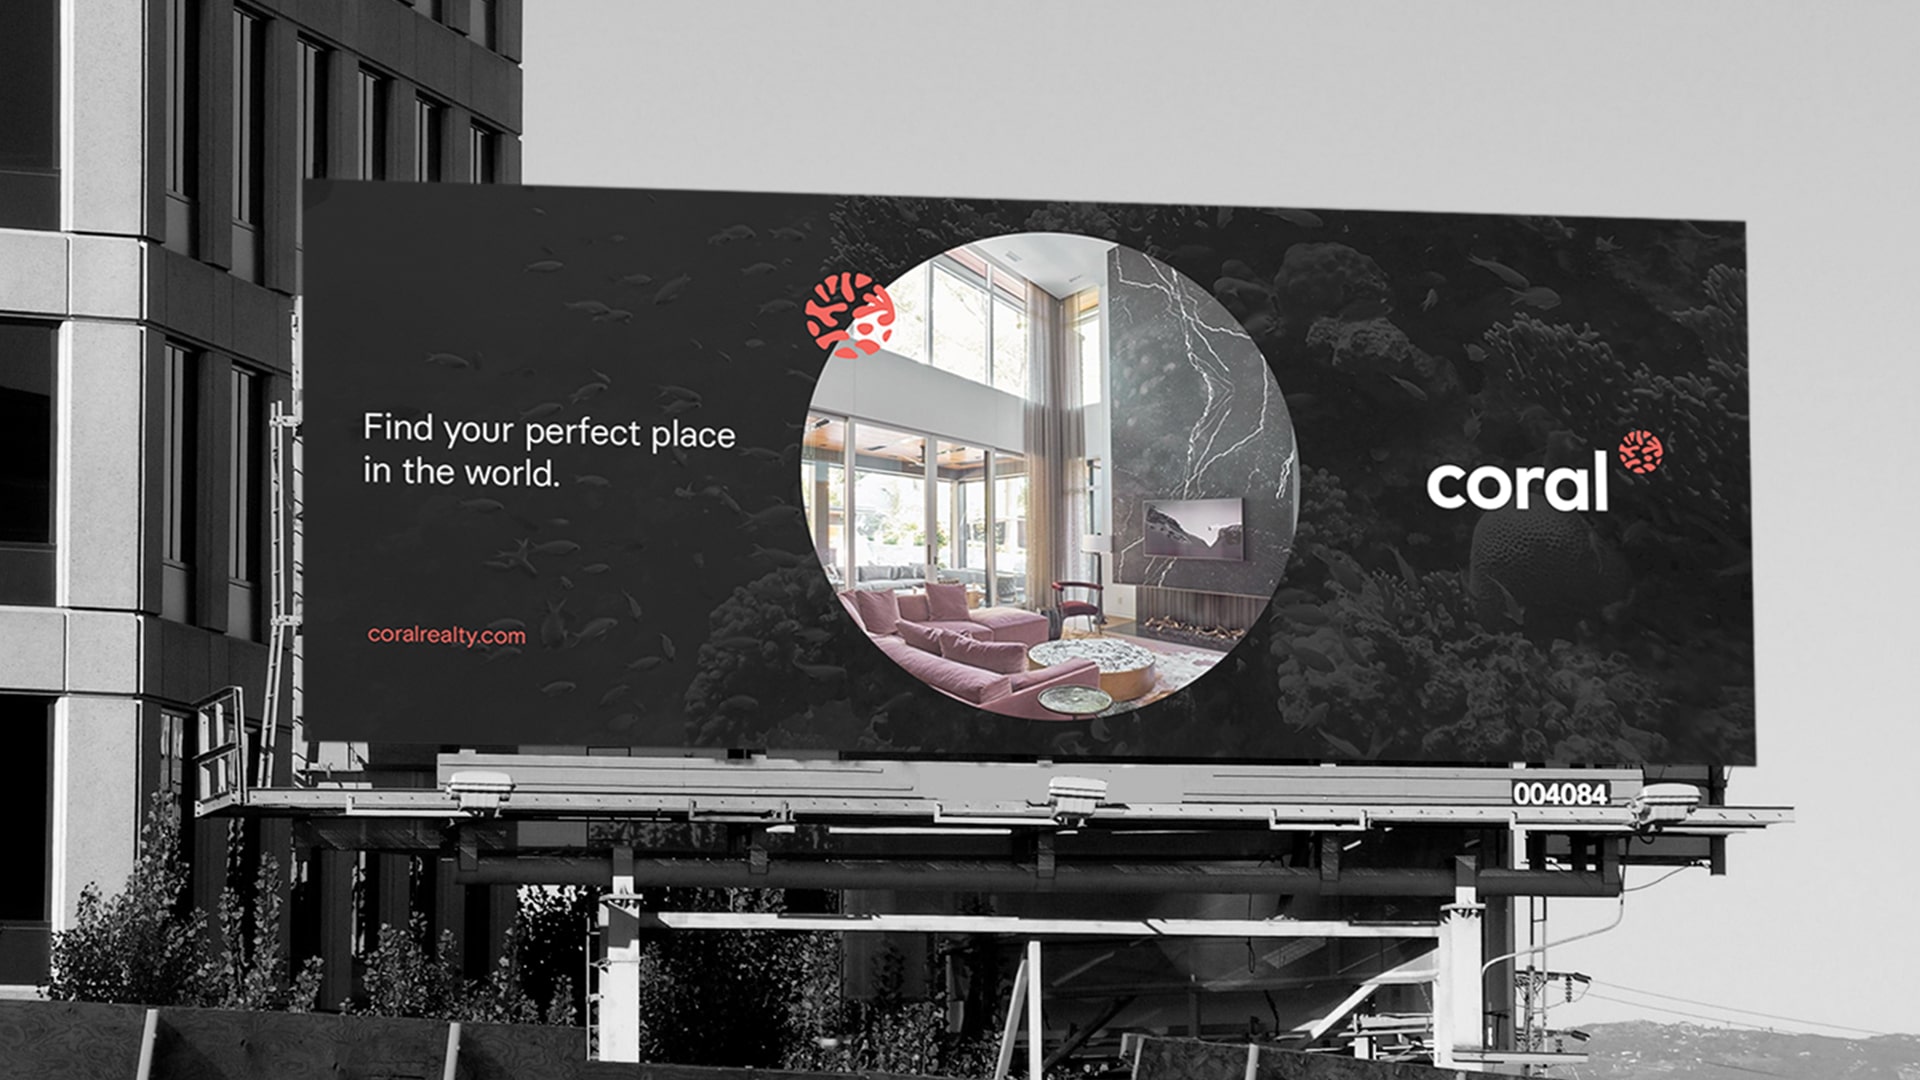 Coral Realty - Real Estate Branding